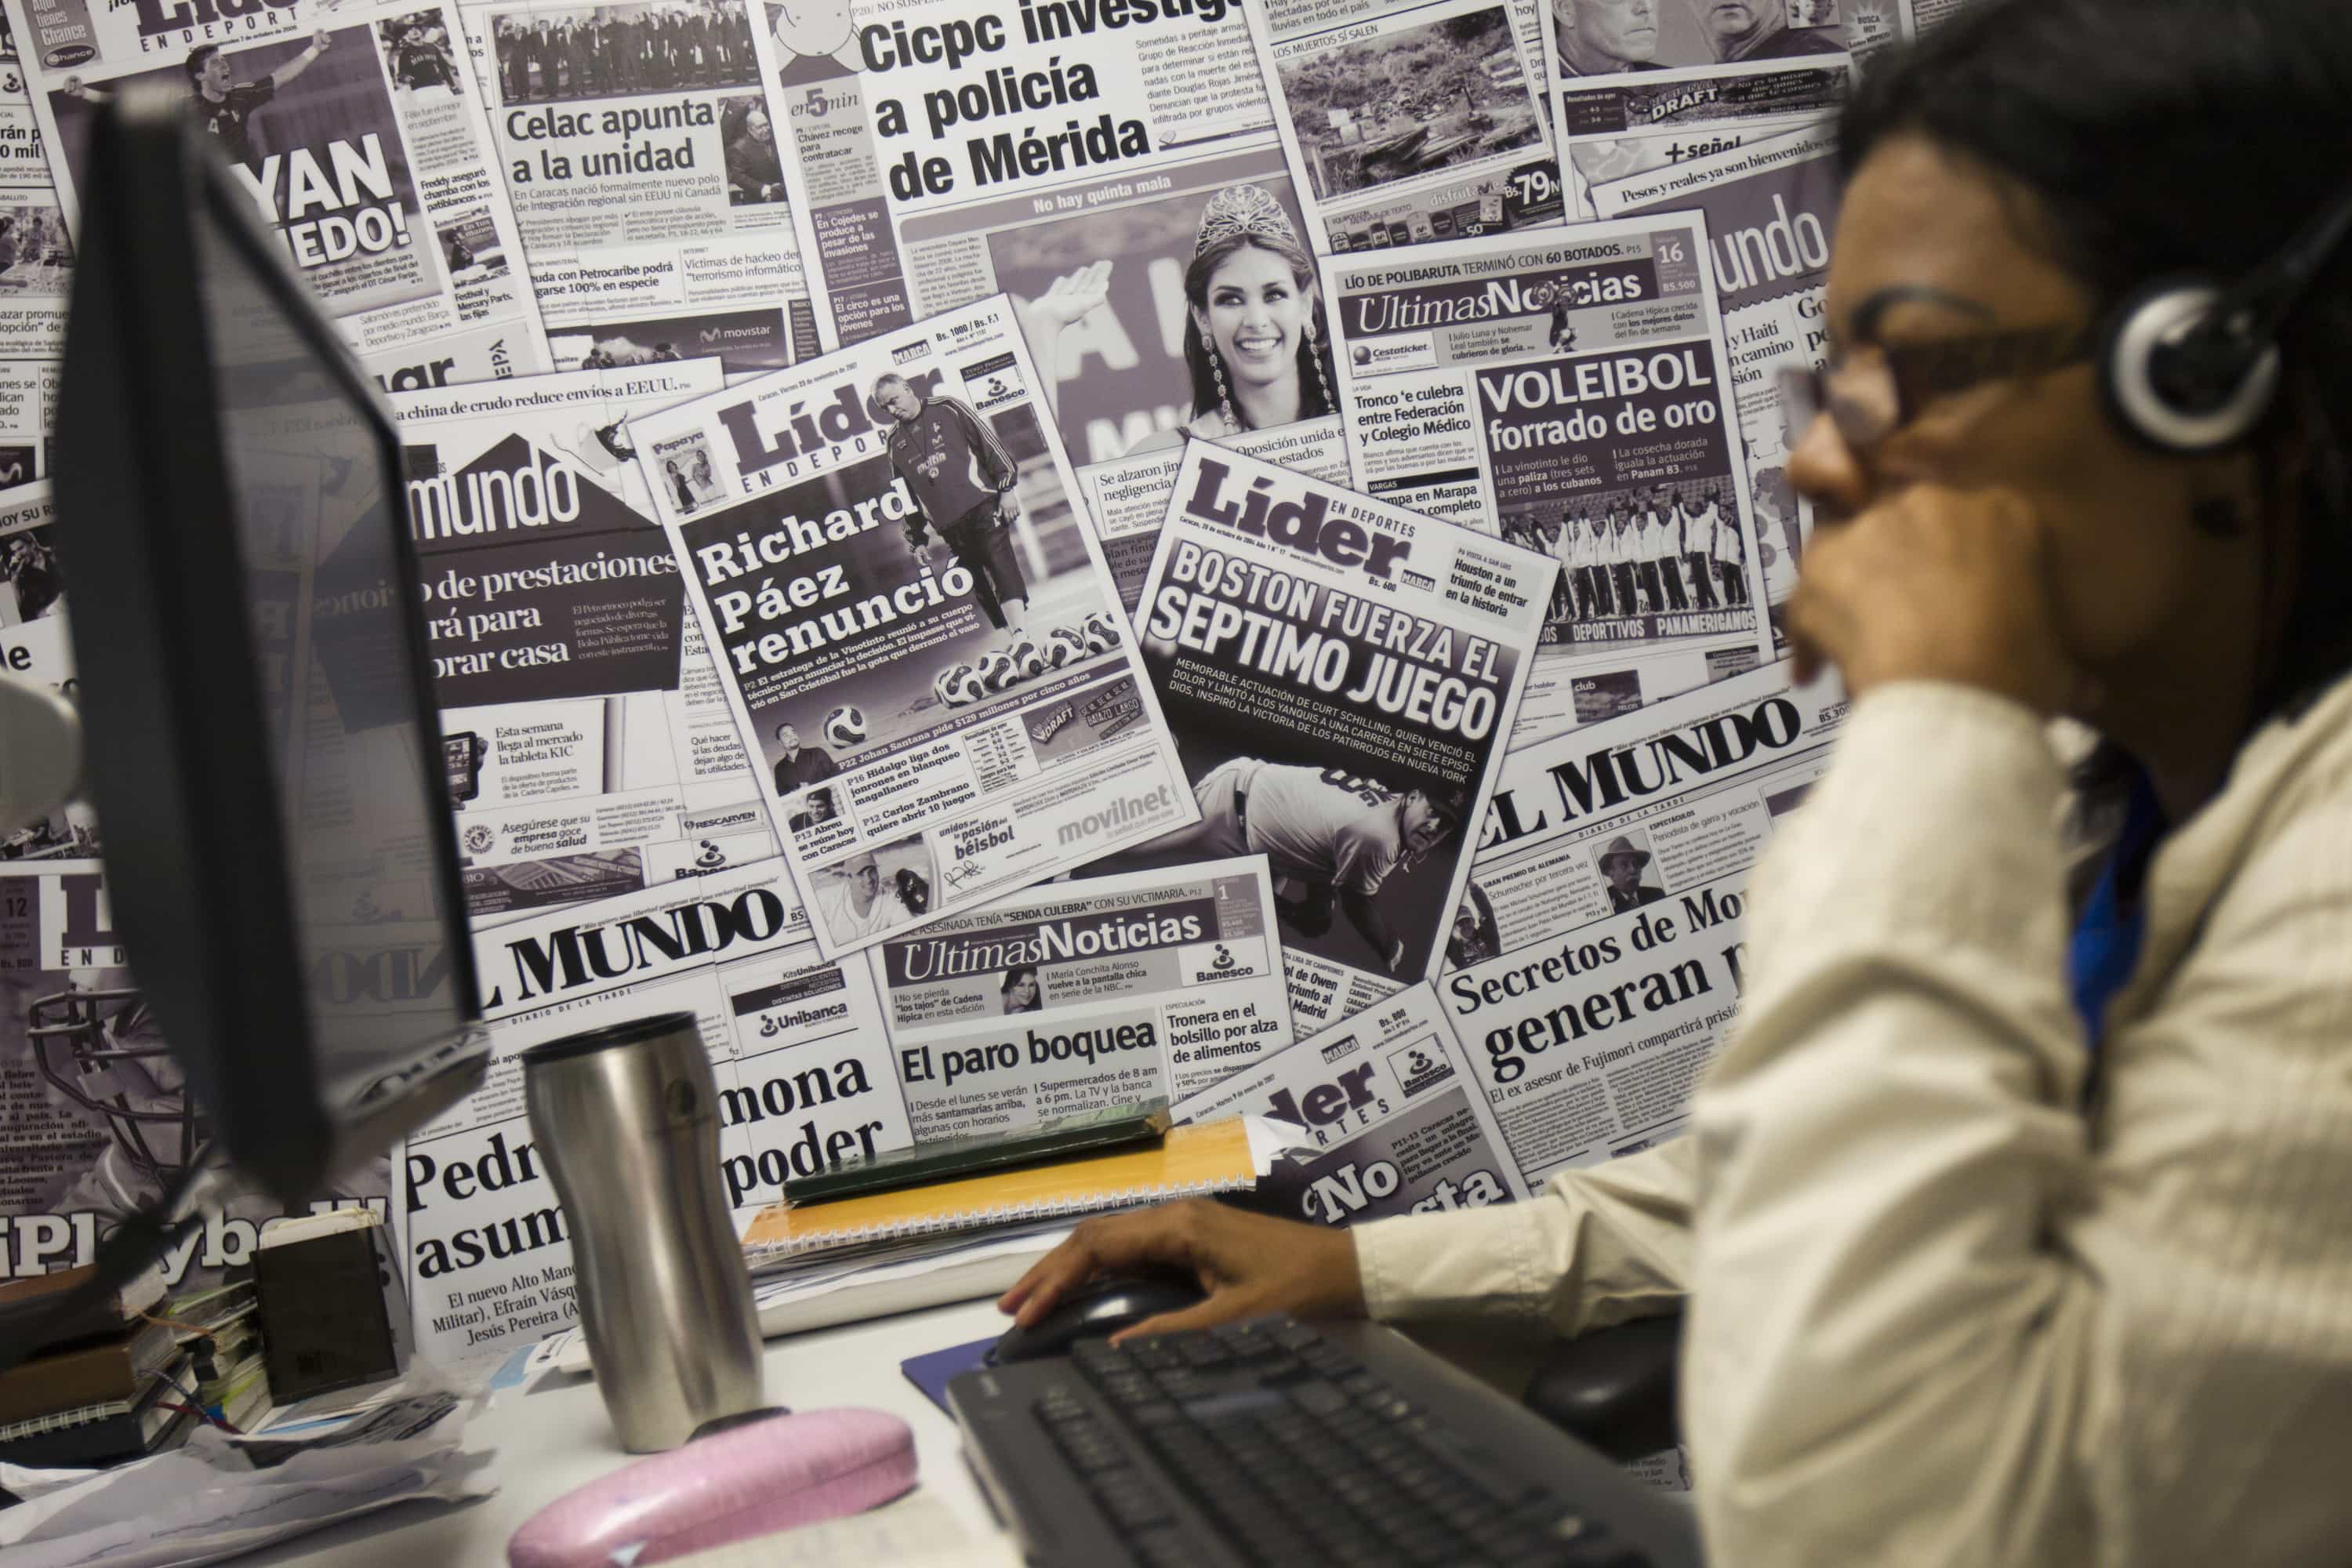 A journalist works at the newsroom of the headquarters of Cadena Capriles in Caracas, 3 June 2013, REUTERS/Carlos Garcia Rawlins